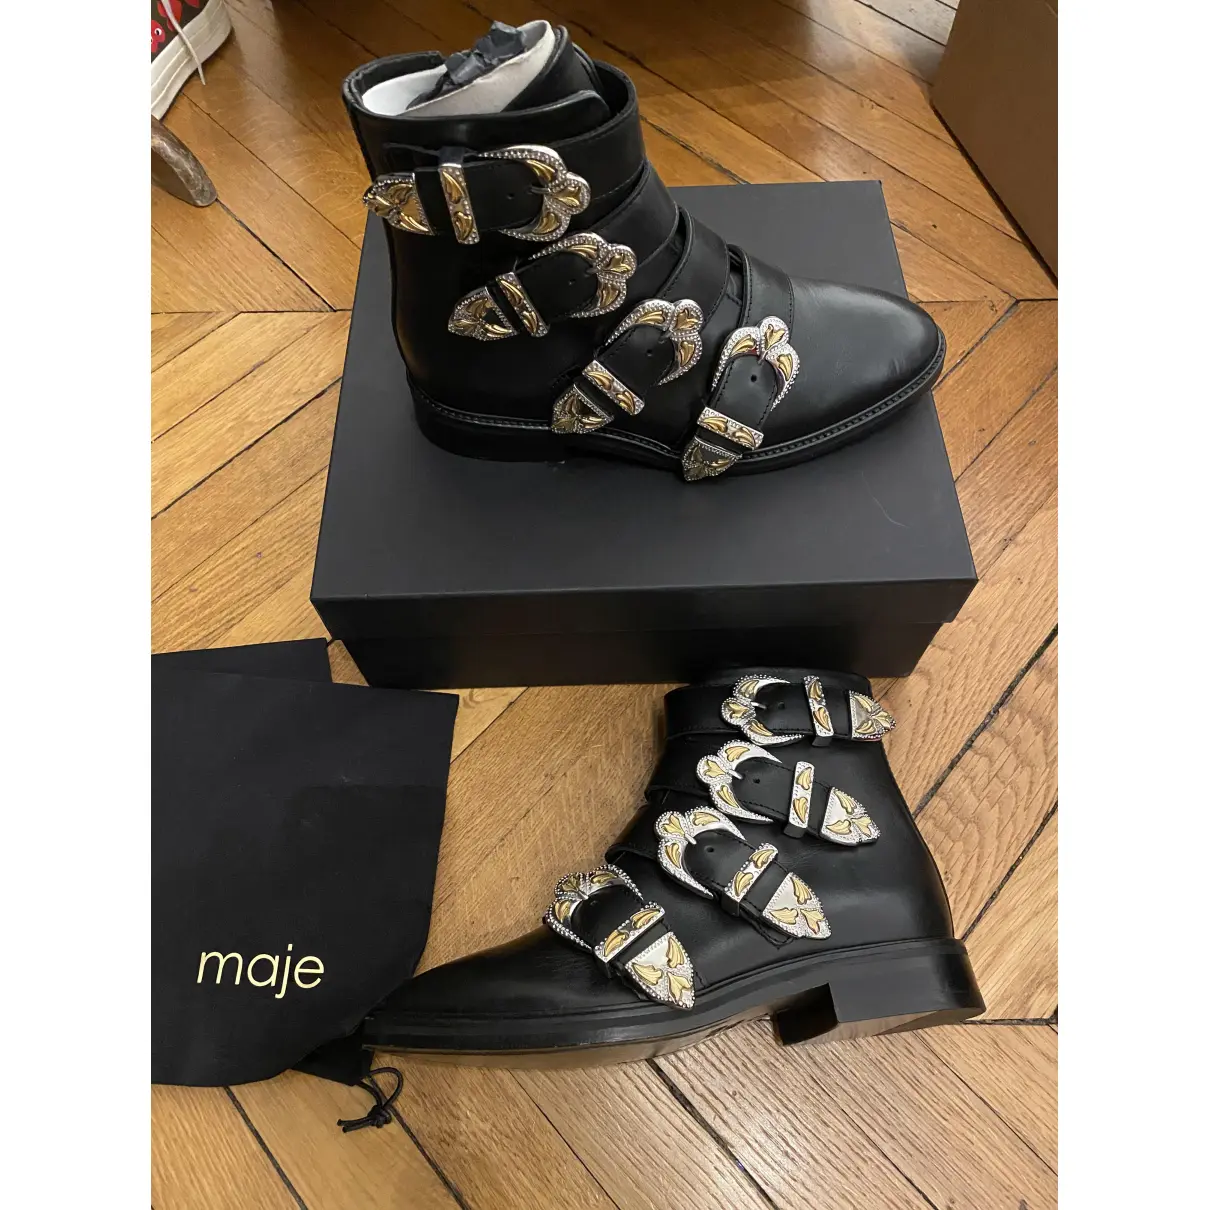 Buy Maje Fall Winter 2019 leather buckled boots online